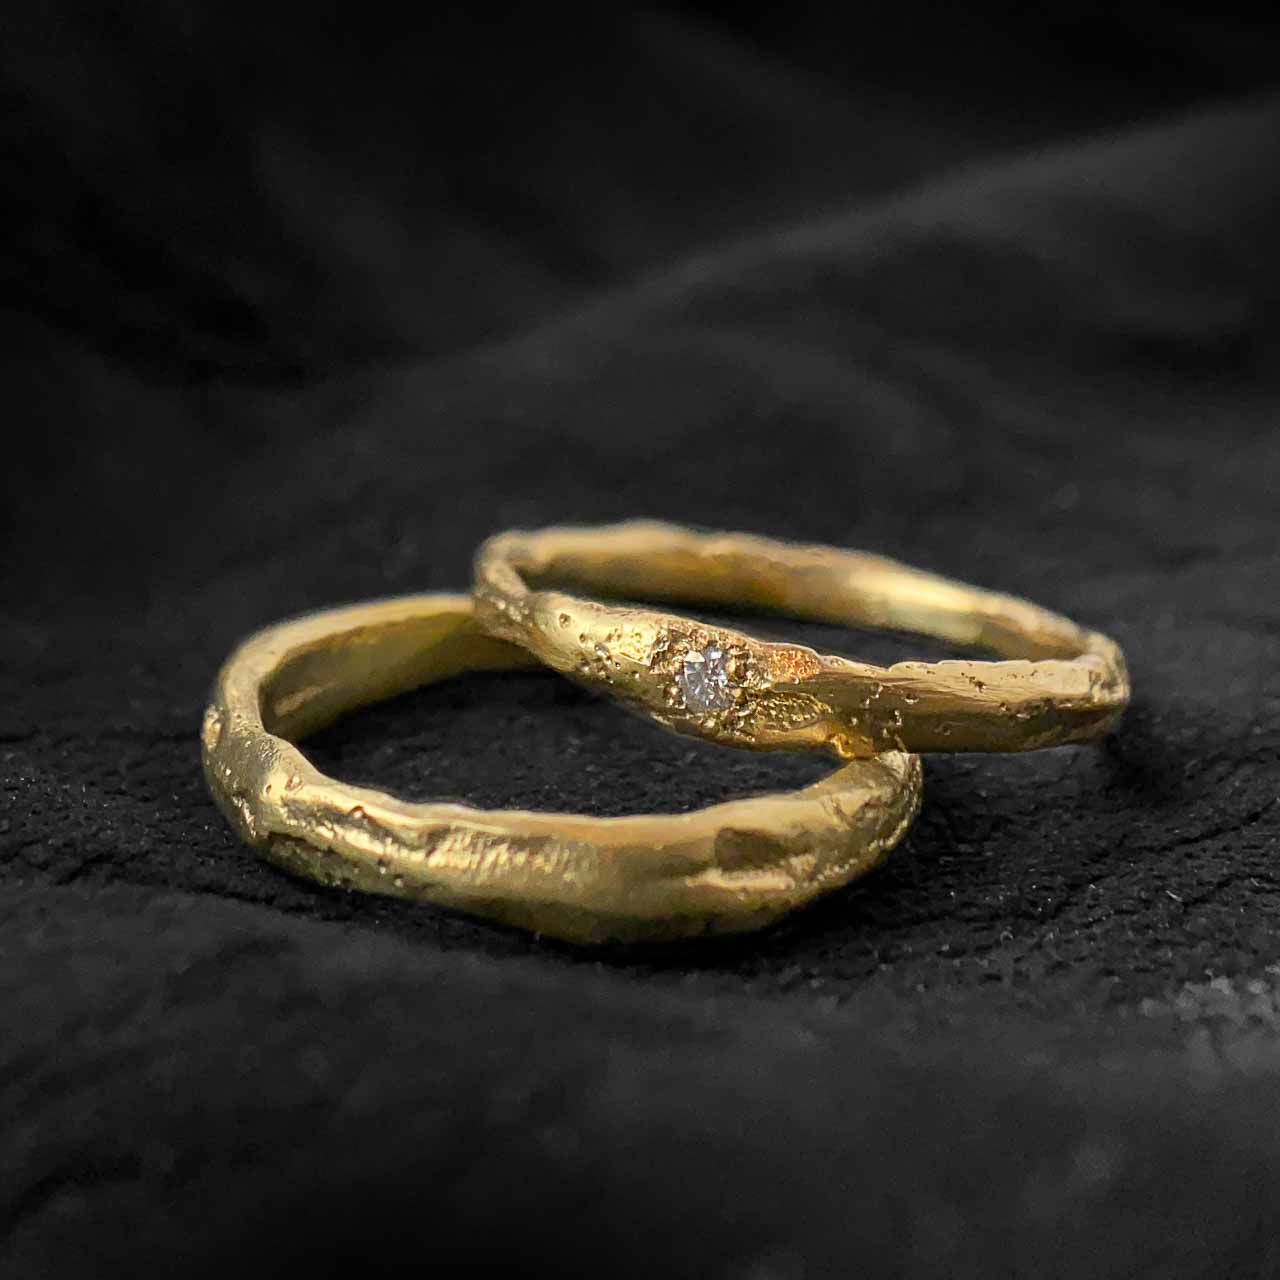 two wedding bands in yellow gold on a dark background.